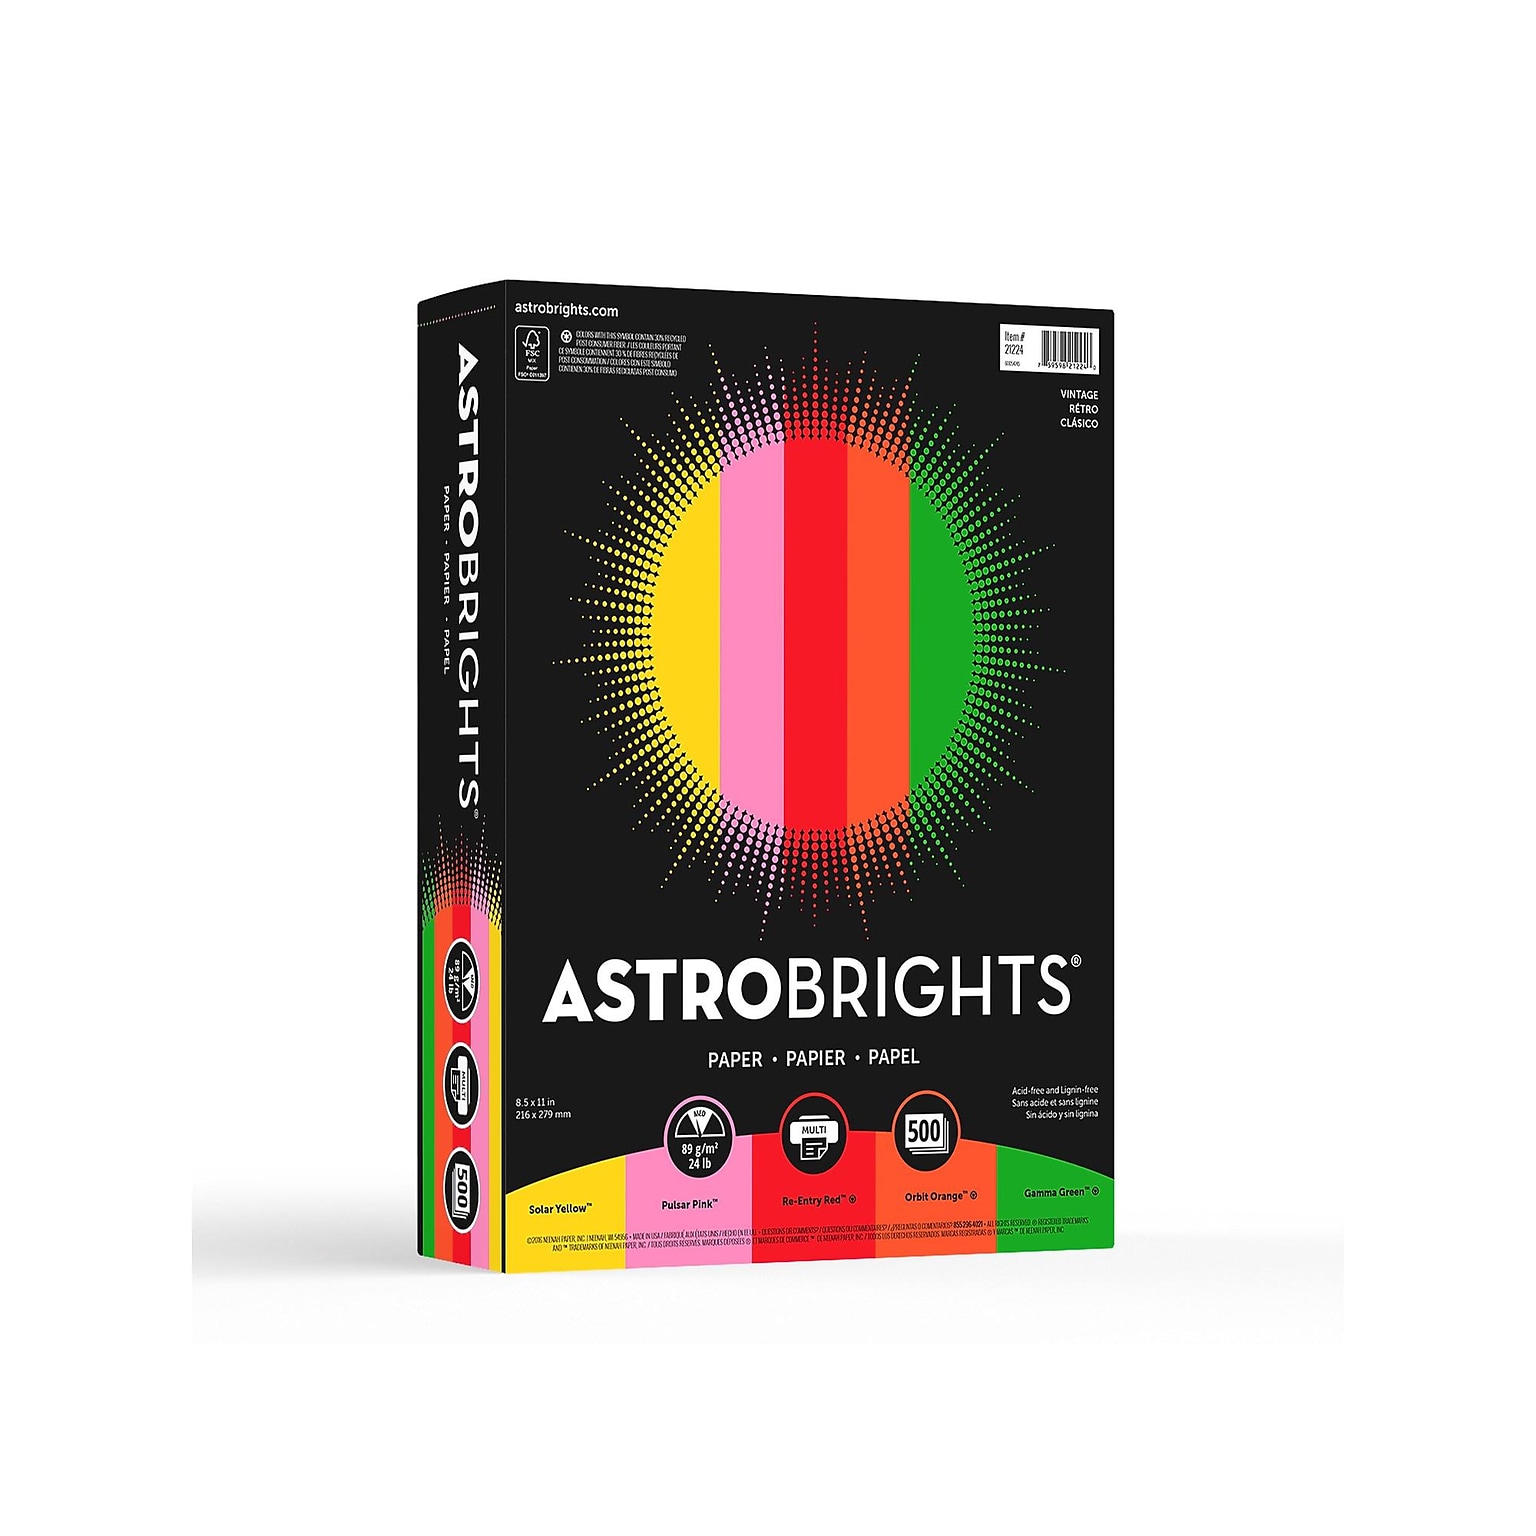 Astrobrights Vintage Multipurpose Paper, 24 lbs., 8.5 x 11, Assorted Colors, 500 Sheets/Pack (21224)